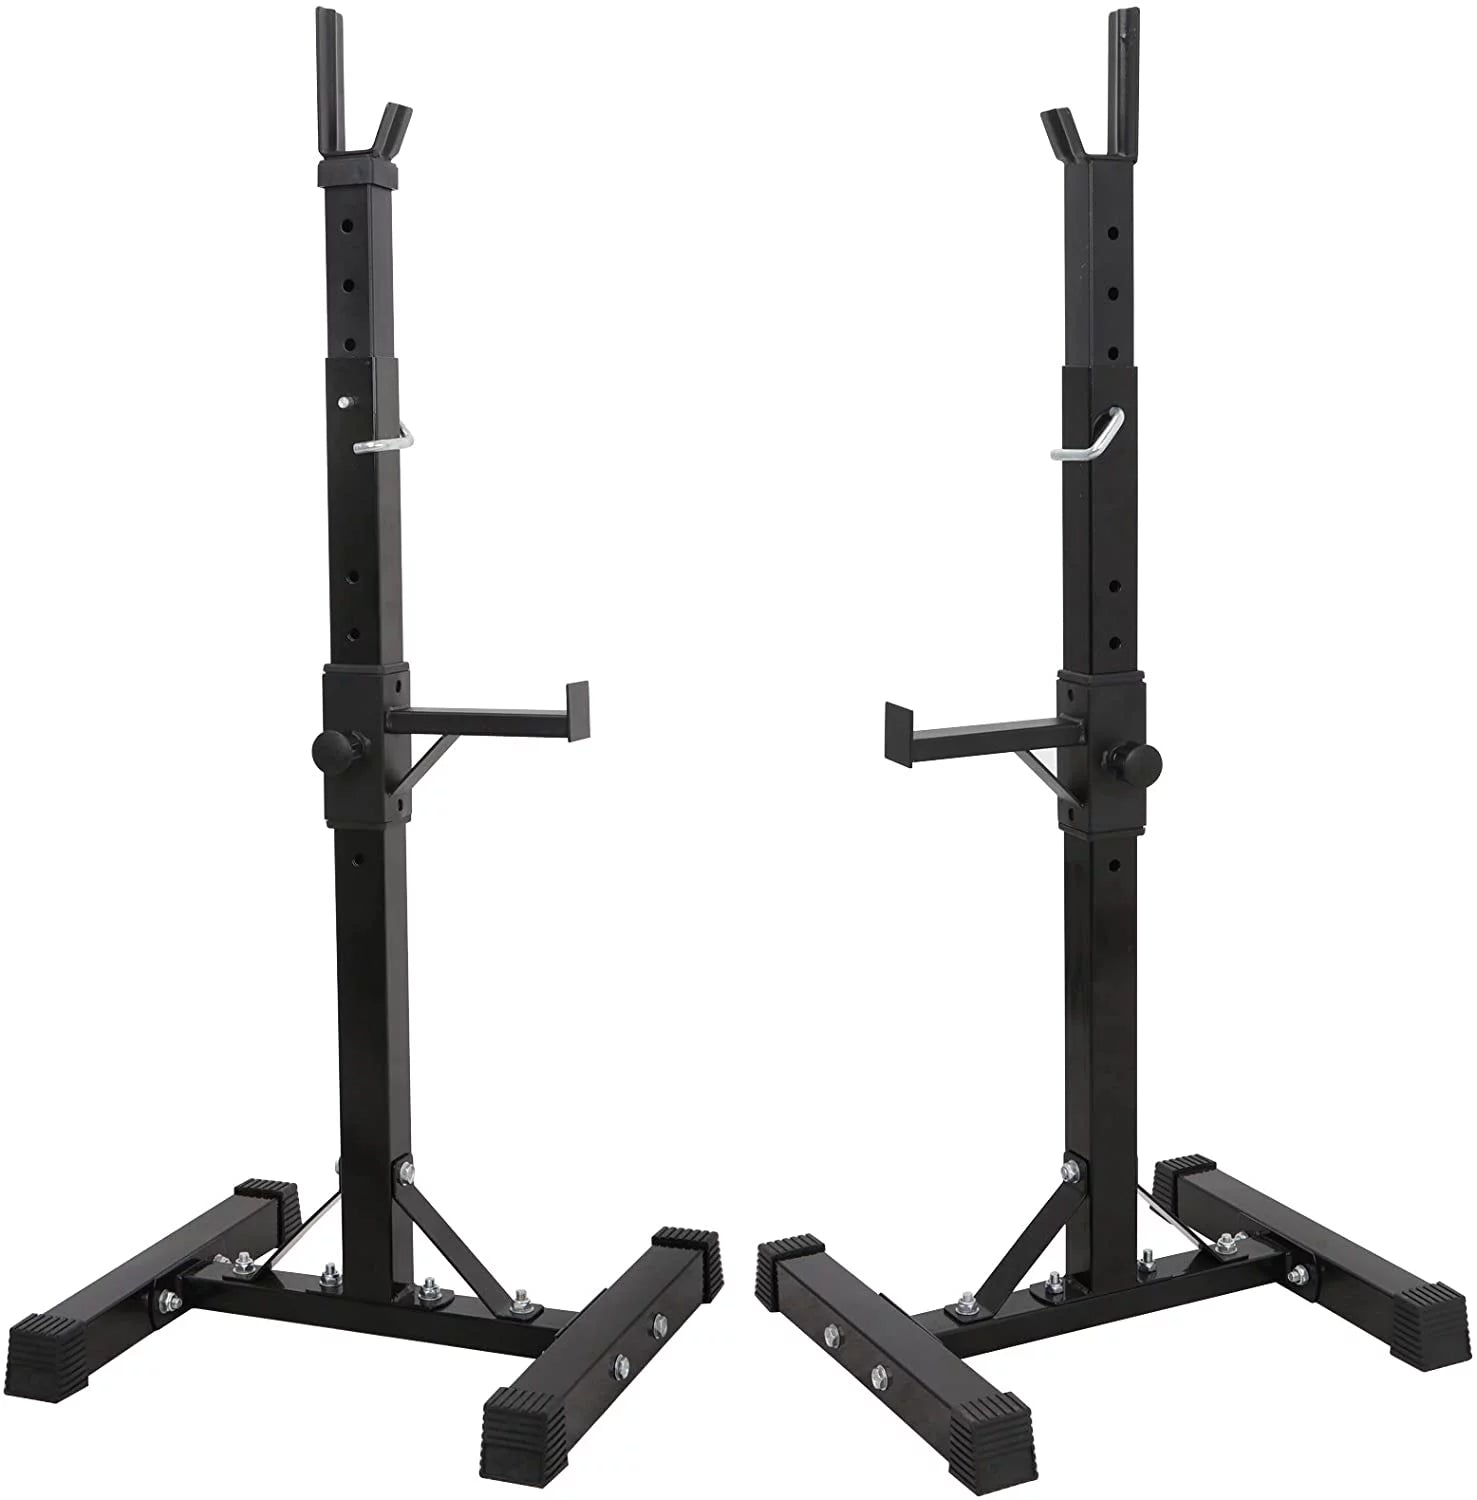 ZENY Pair of Adjustable Barbell Rack Stand Squat Bench Press Home GYM Weightlifting Fitness Exercise